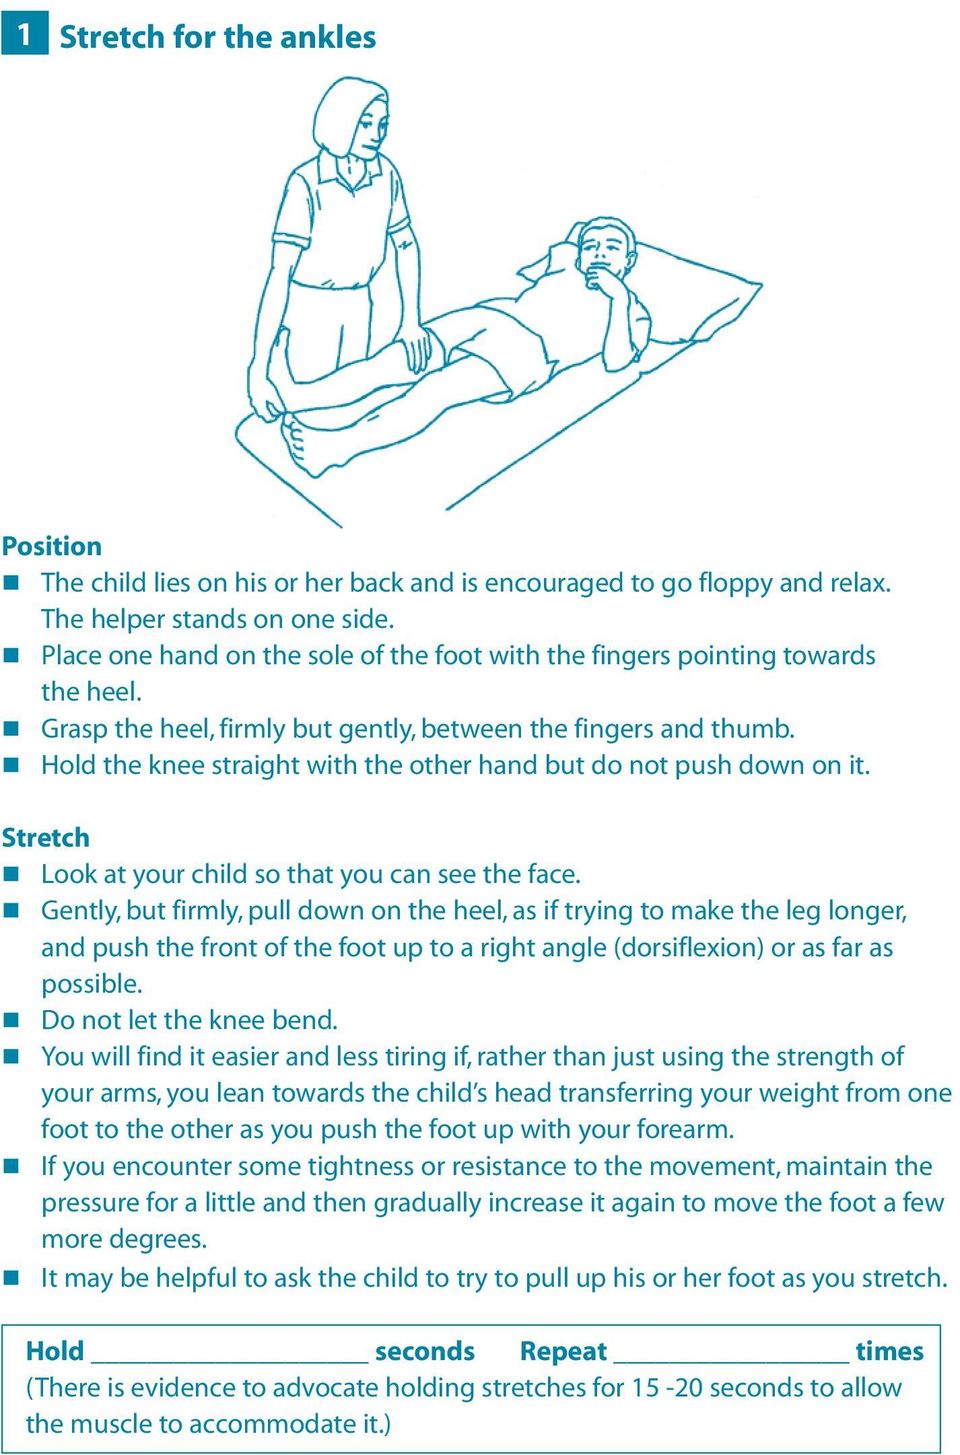 Hold the knee straight with the other hand but do not push down on it. Look at your child so that you can see the face.